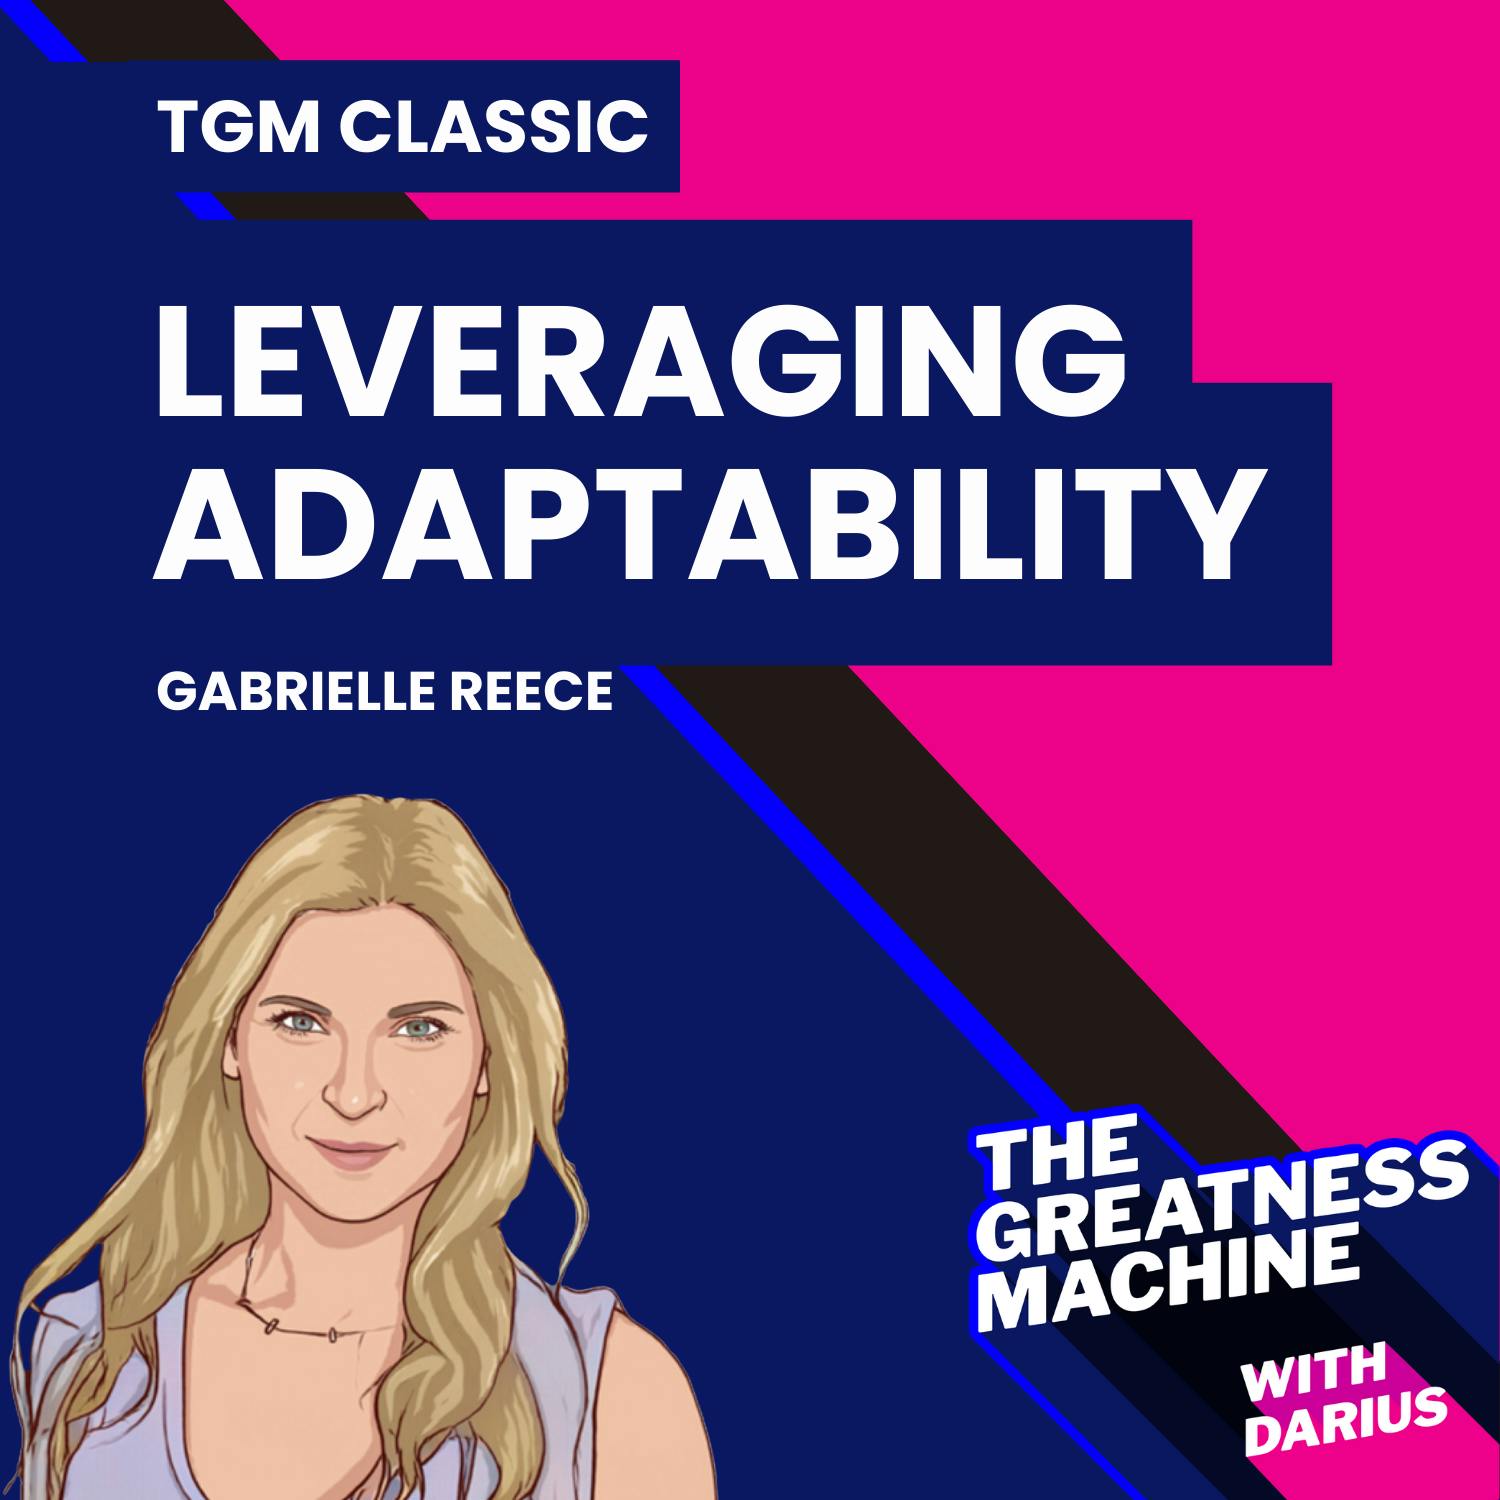 TGM Classic | Gabrielle “Gabby” Reece | How to Leverage Adaptability to Become A World-Class Sports Icon, Super Model, and Fitness Thought Leader